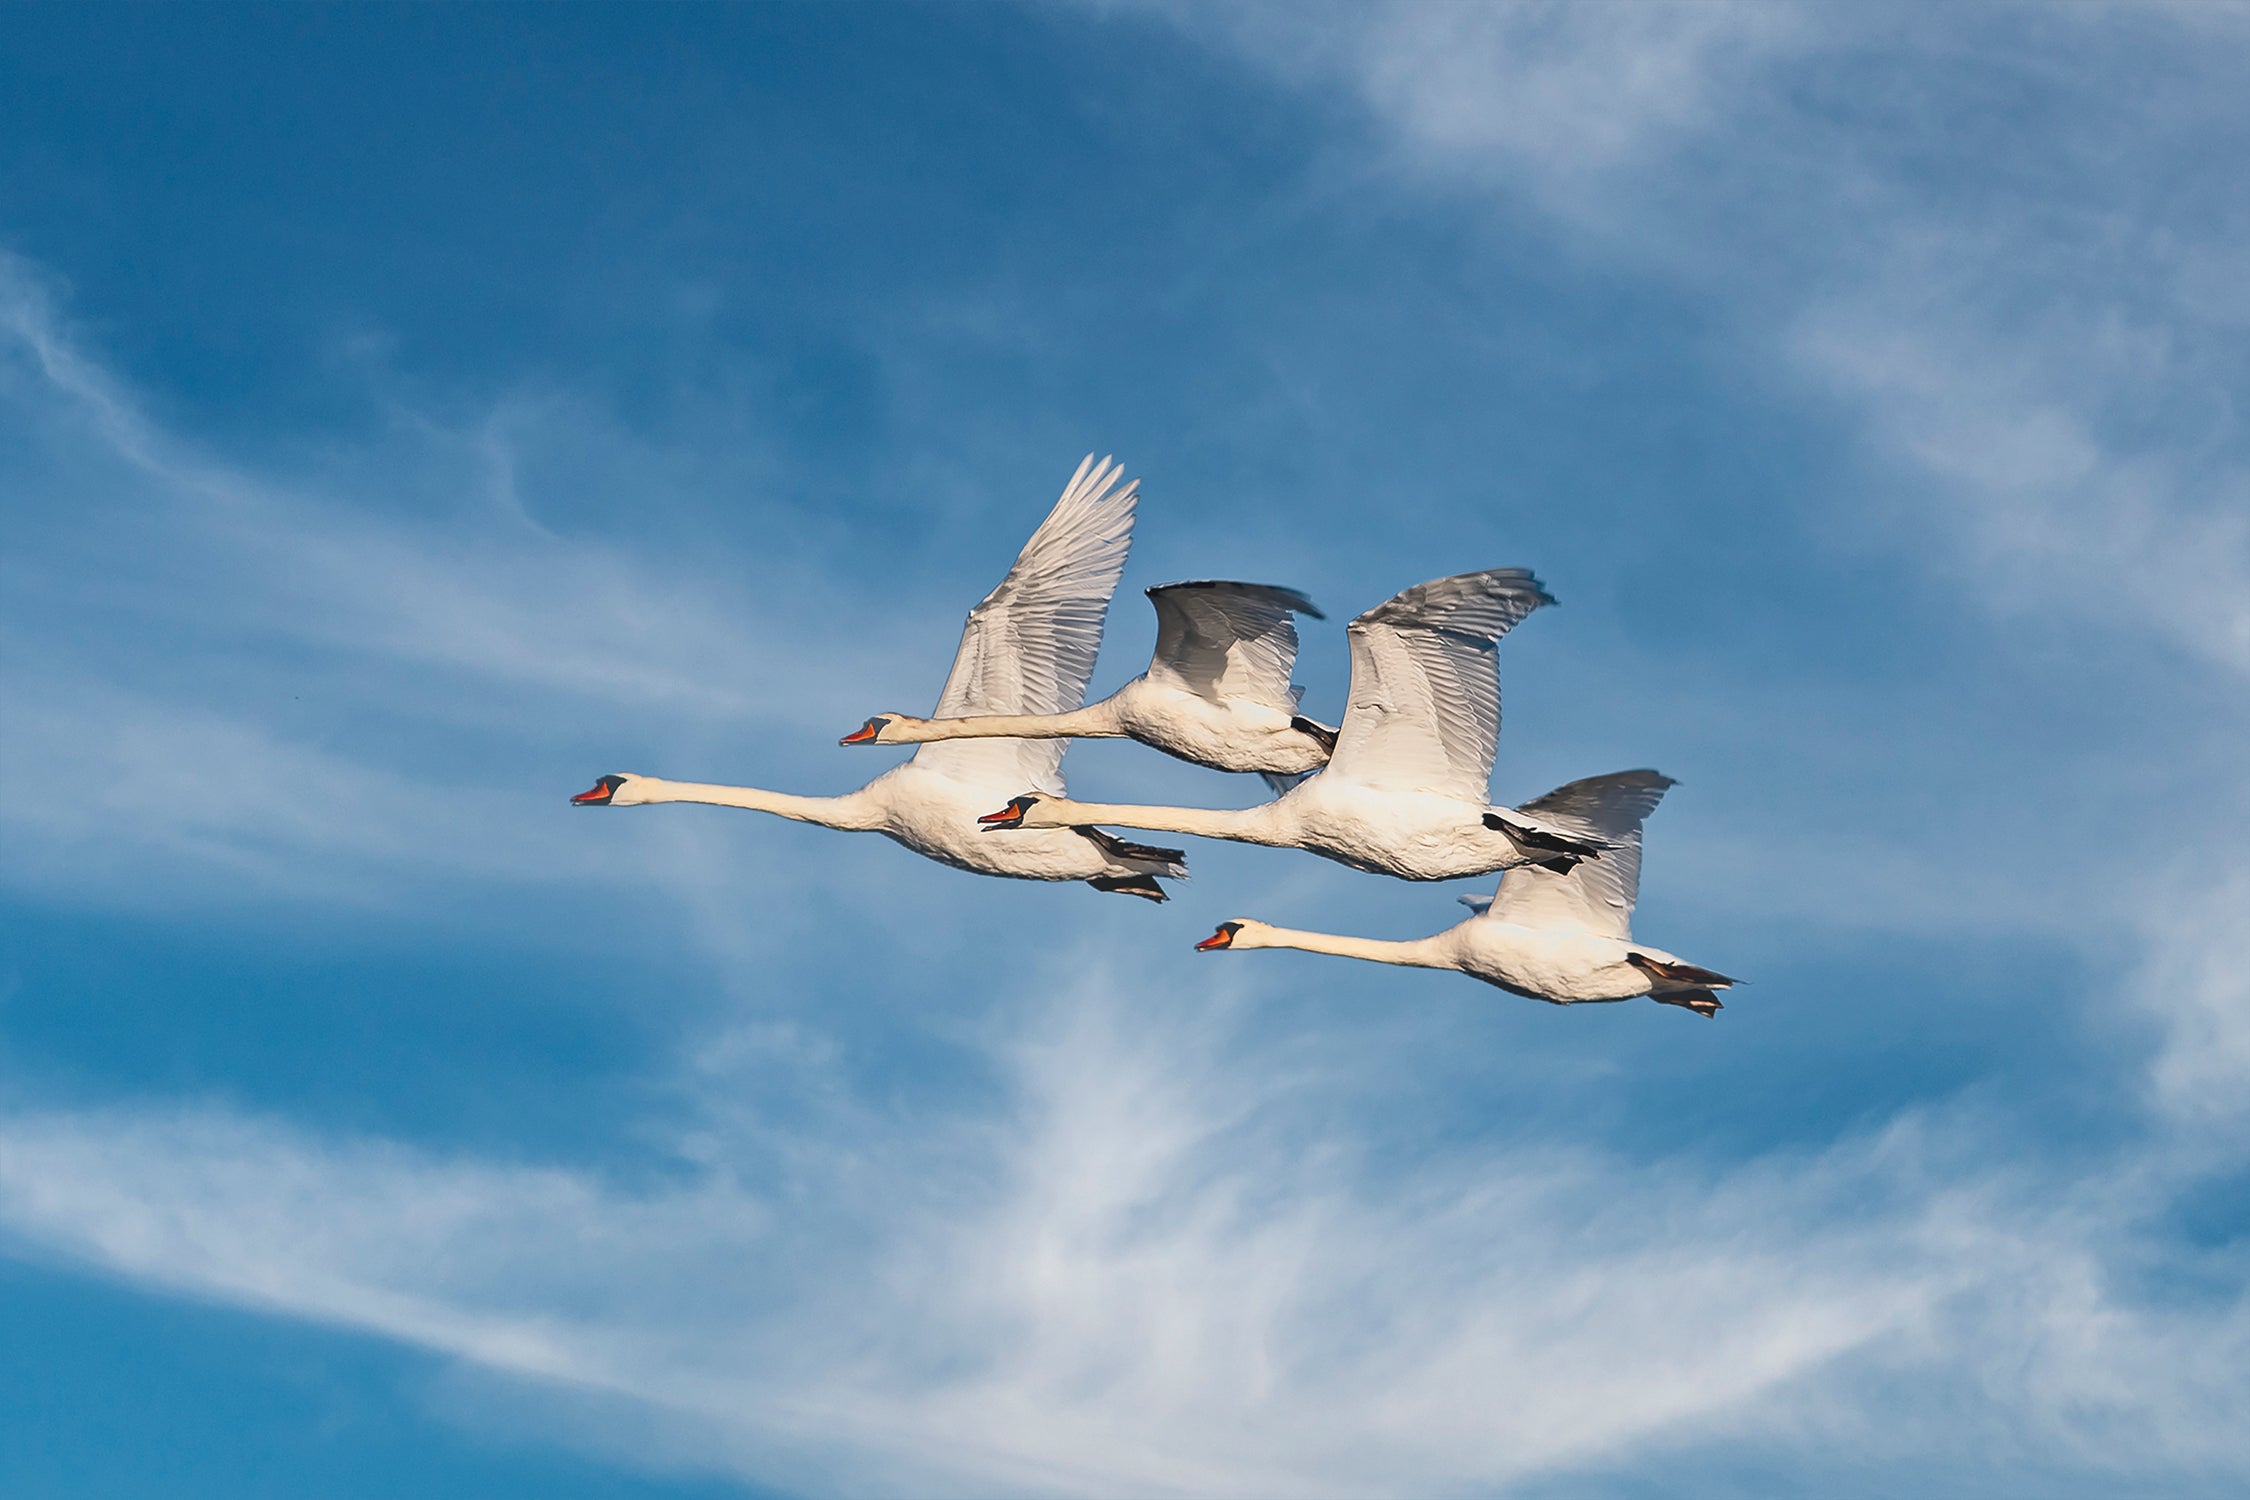 Four Swans Fly Fast over a Blue Sky